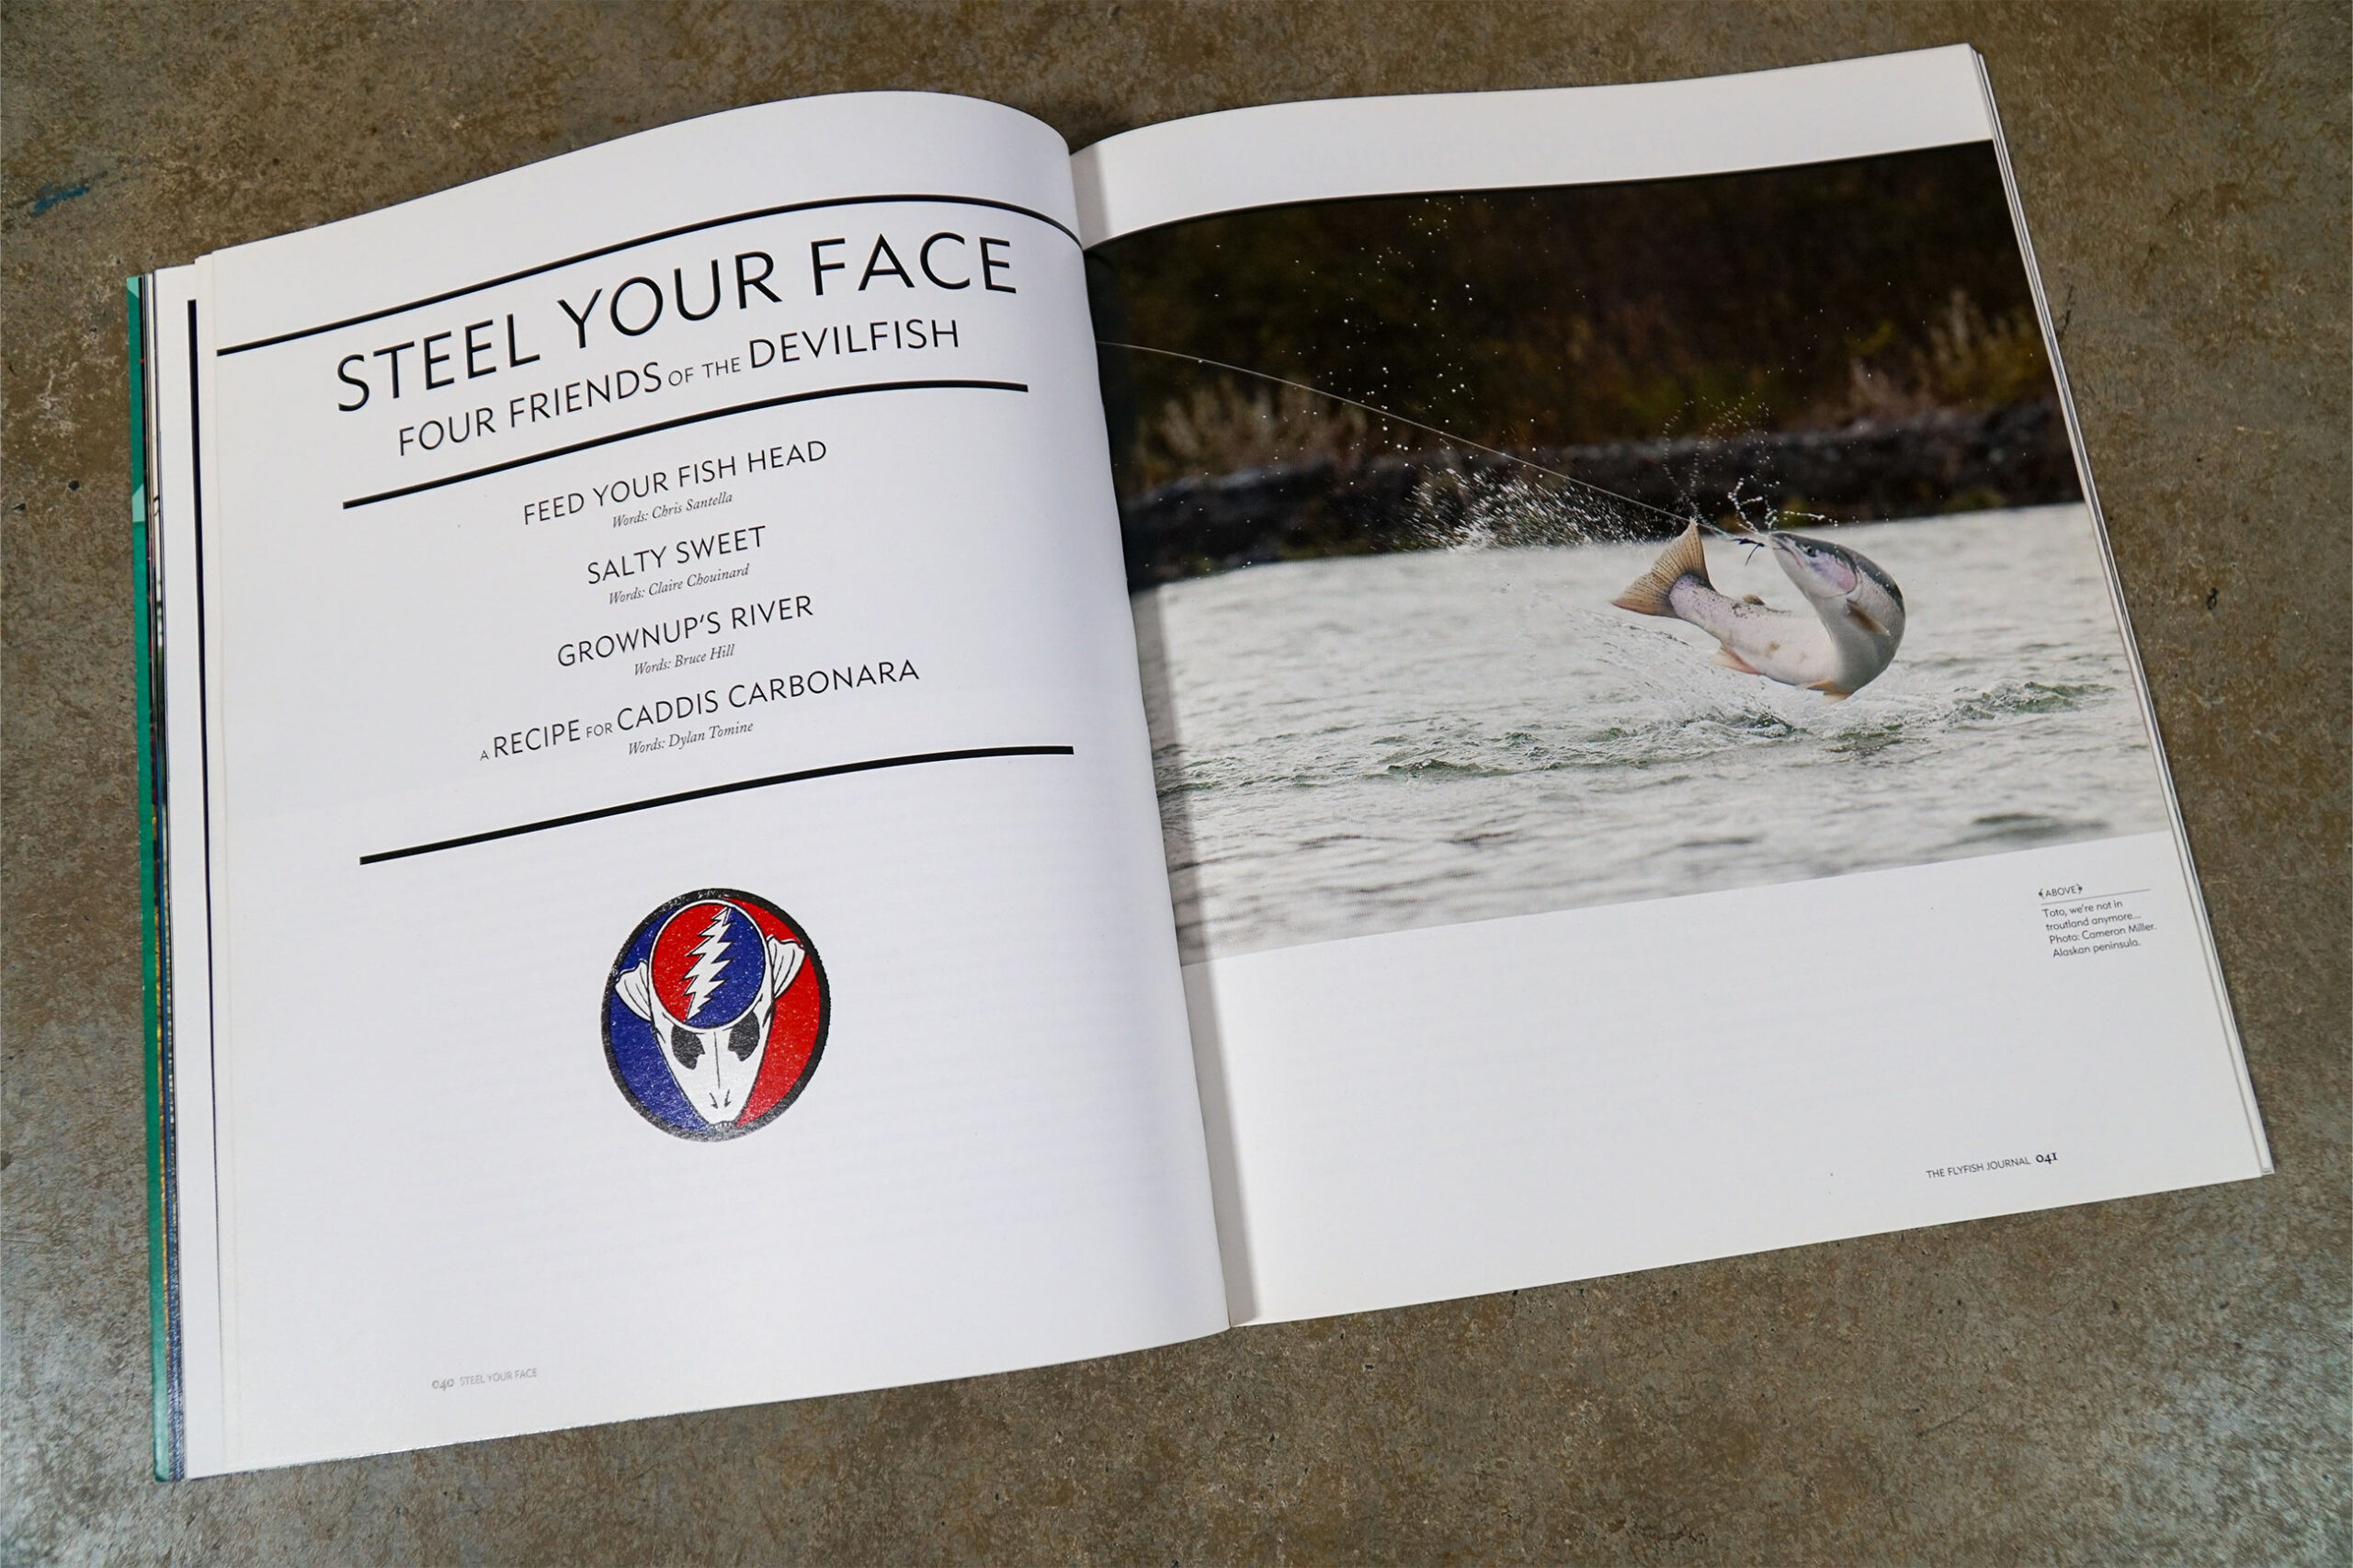 The Flyfish Journal Volume 1 Issue 1 Feature Steel Your Face